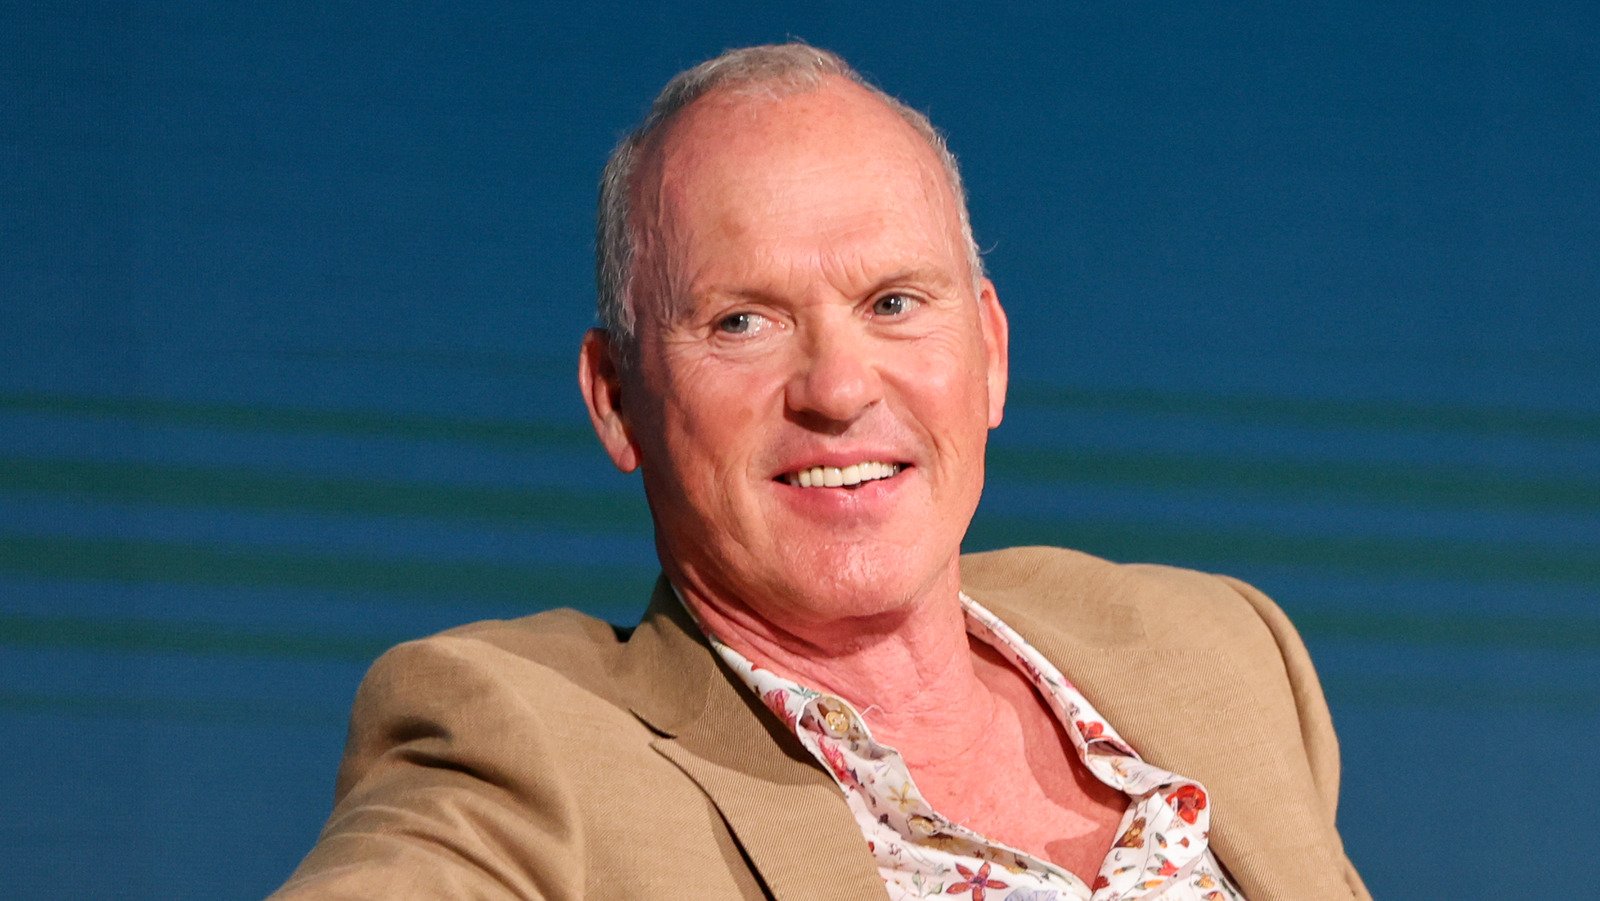 Michael Keaton's 60 Minutes Episode Only Made Fans' Love For Him Grow - Looper